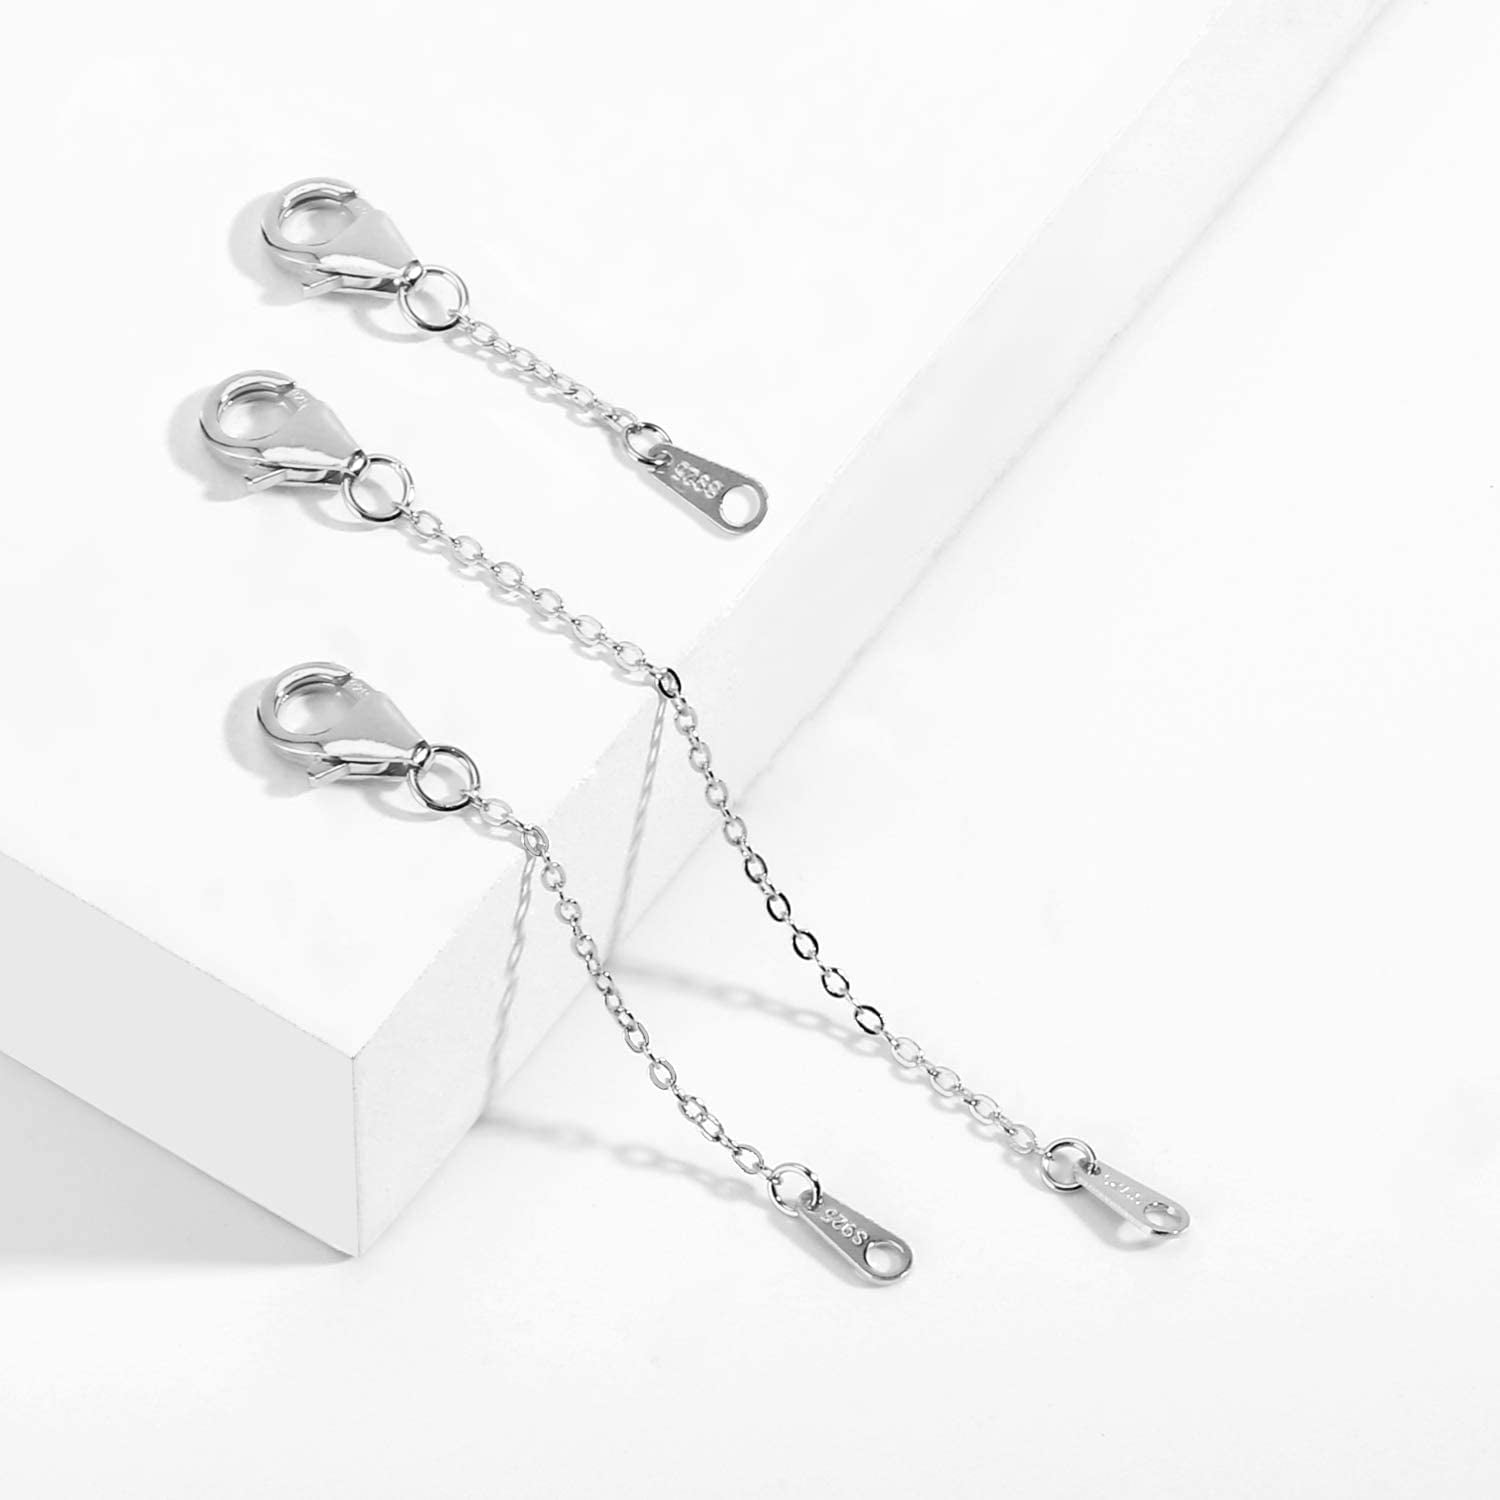 4pcs Necklace Extender, Sterling Silver Chain Extenders for Necklaces Bracelet Anklet, Removable Jewelry Making Chains (2”, 4”, 6”, 8”)